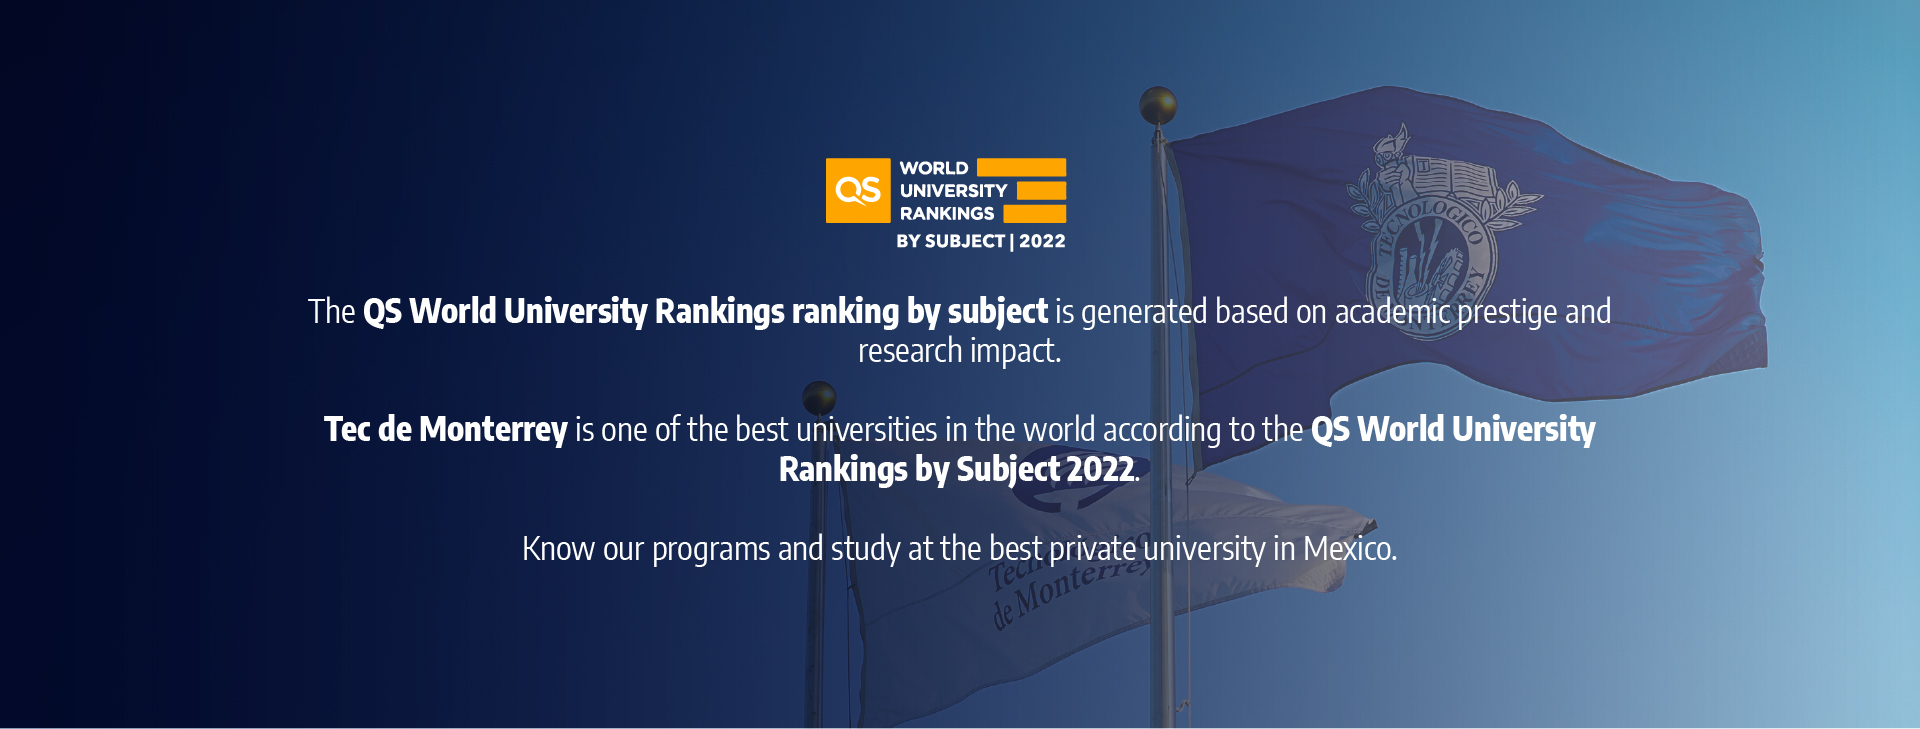 Tec de Monterrey is one of the best universities on the world according to QS World University by Subject 2022